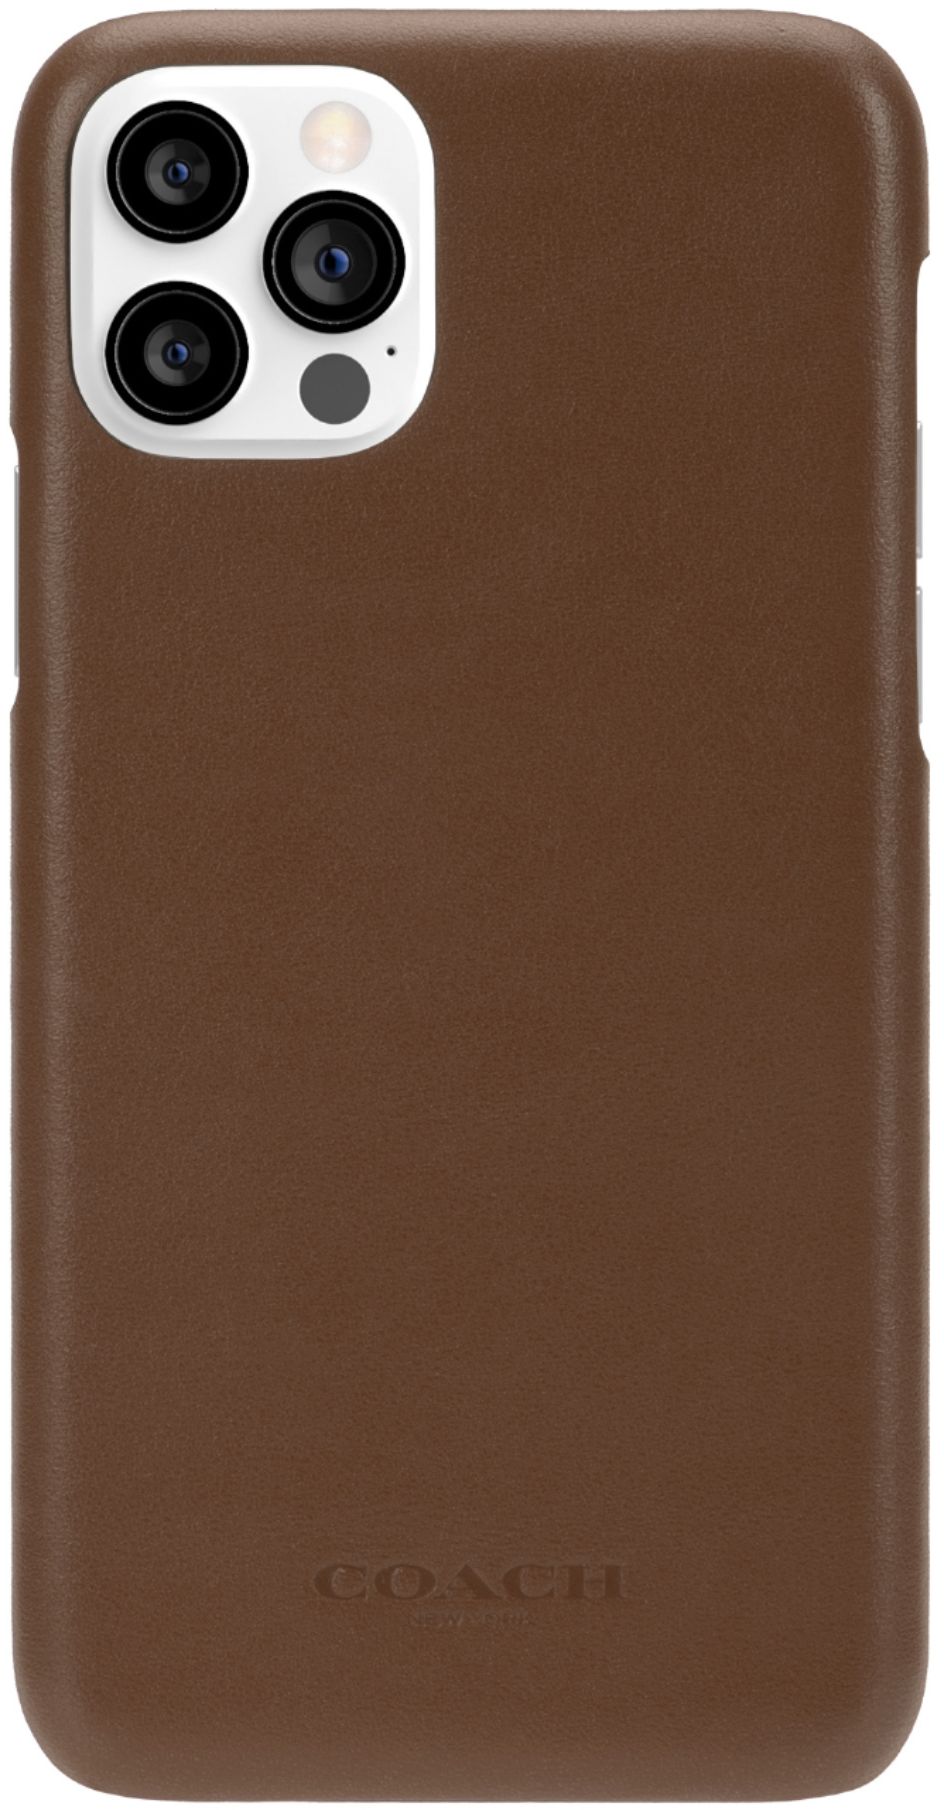 Best Buy: Coach Leather Slim Protective Case for iPhone 12 and 